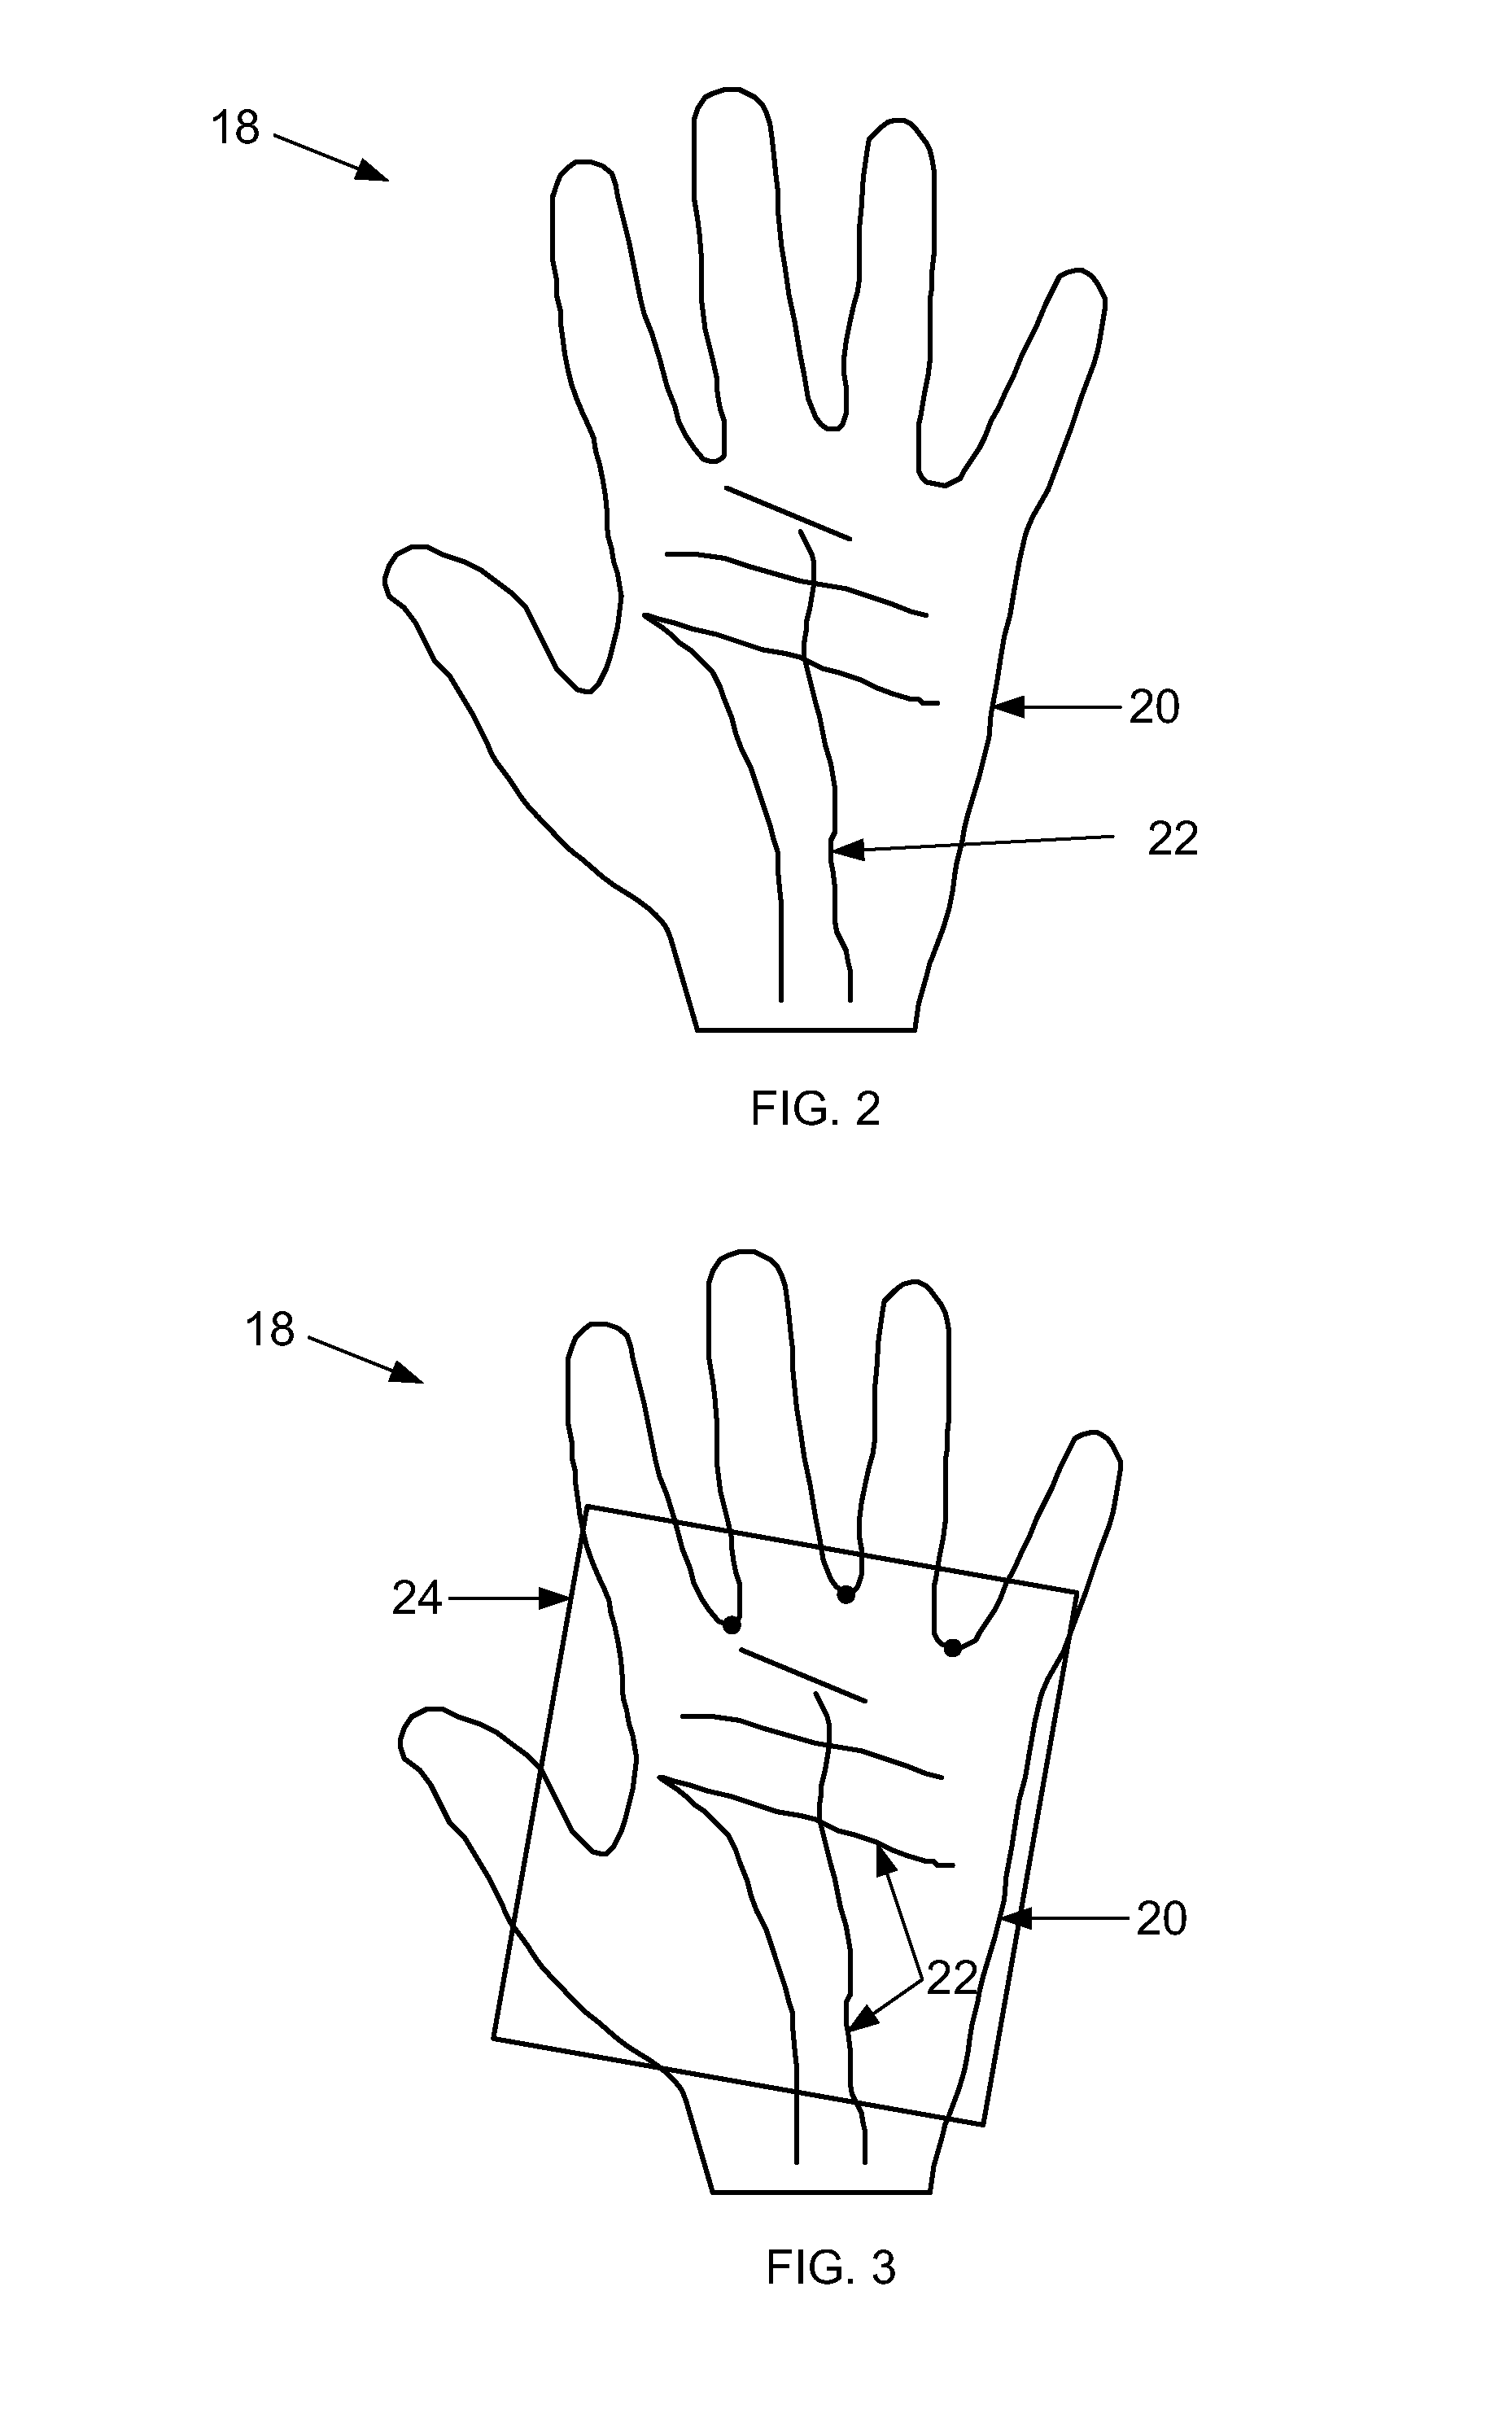 Methods and systems for authenticating users